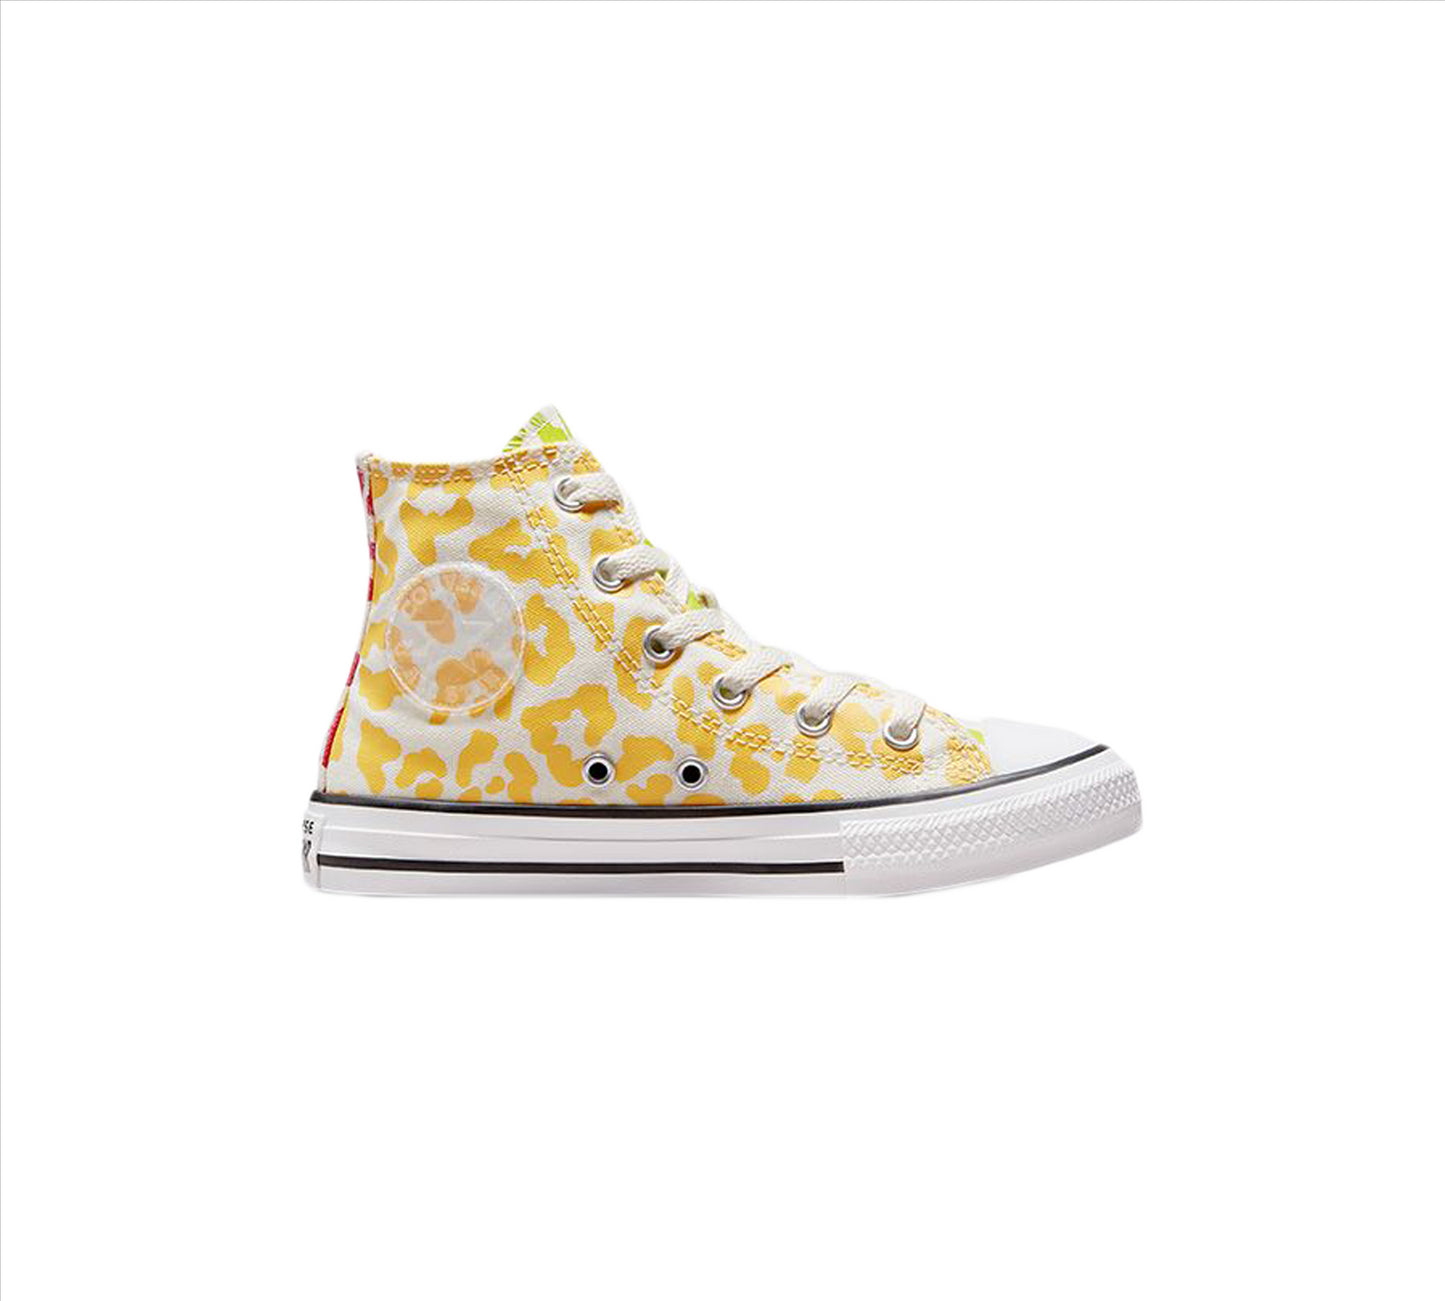 Converse Leopard Print Chuck Taylor All Star Shoes